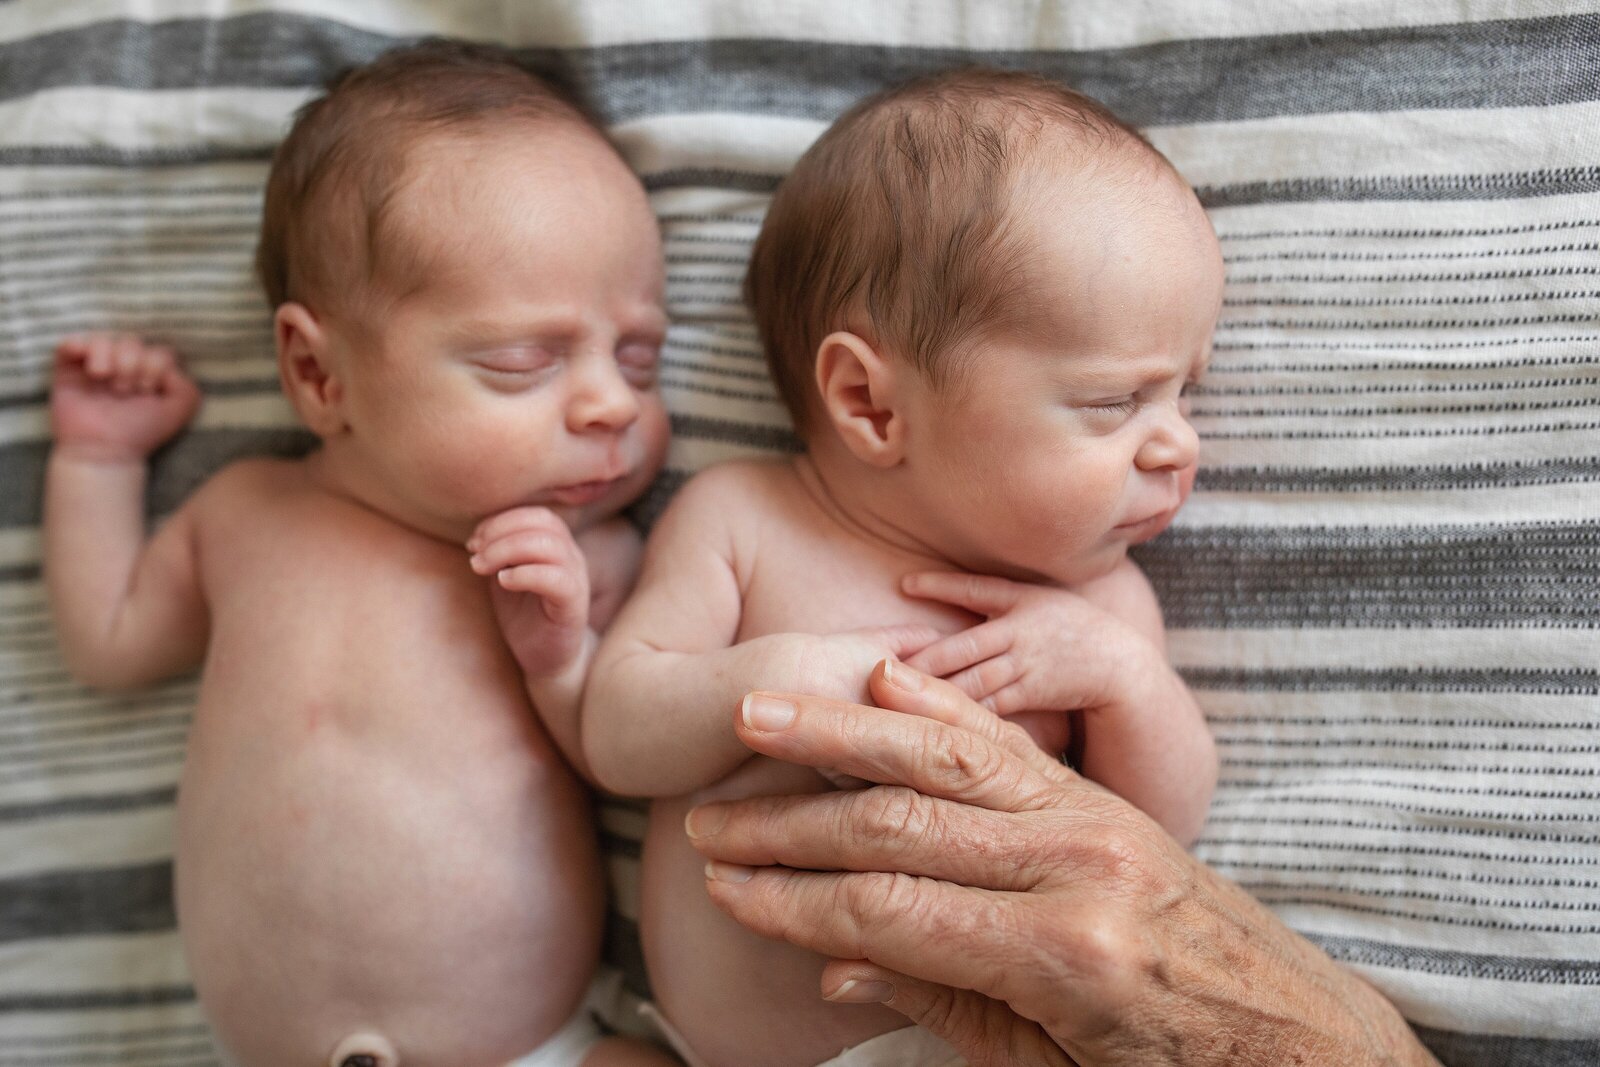 Newborn twins with grandma's hand to soothe them during Seattle newborn photography session